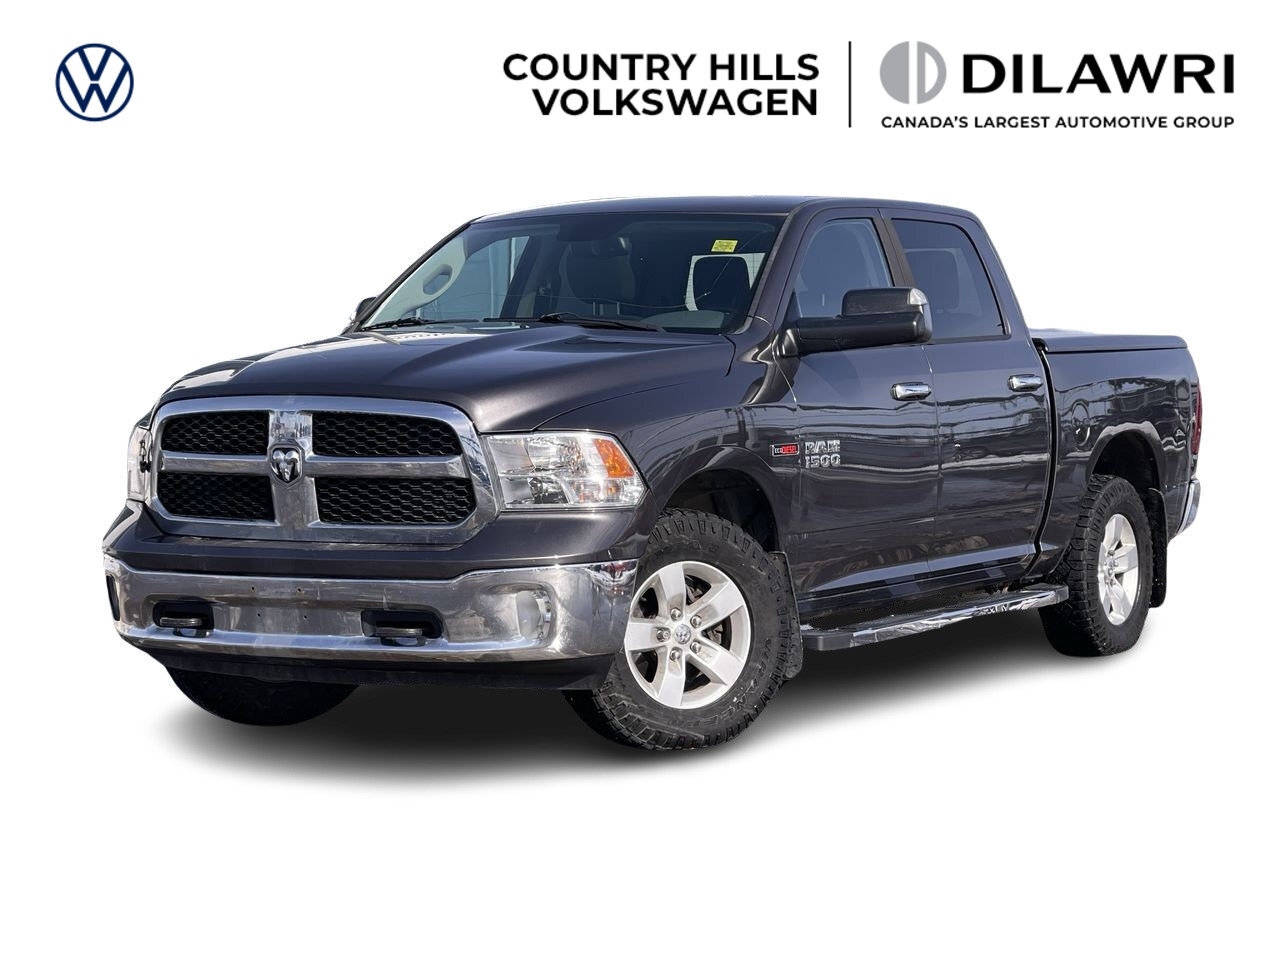 2015 Ram 1500 SLT 4WD EcoDiesel Locally Owned/One Owner / 